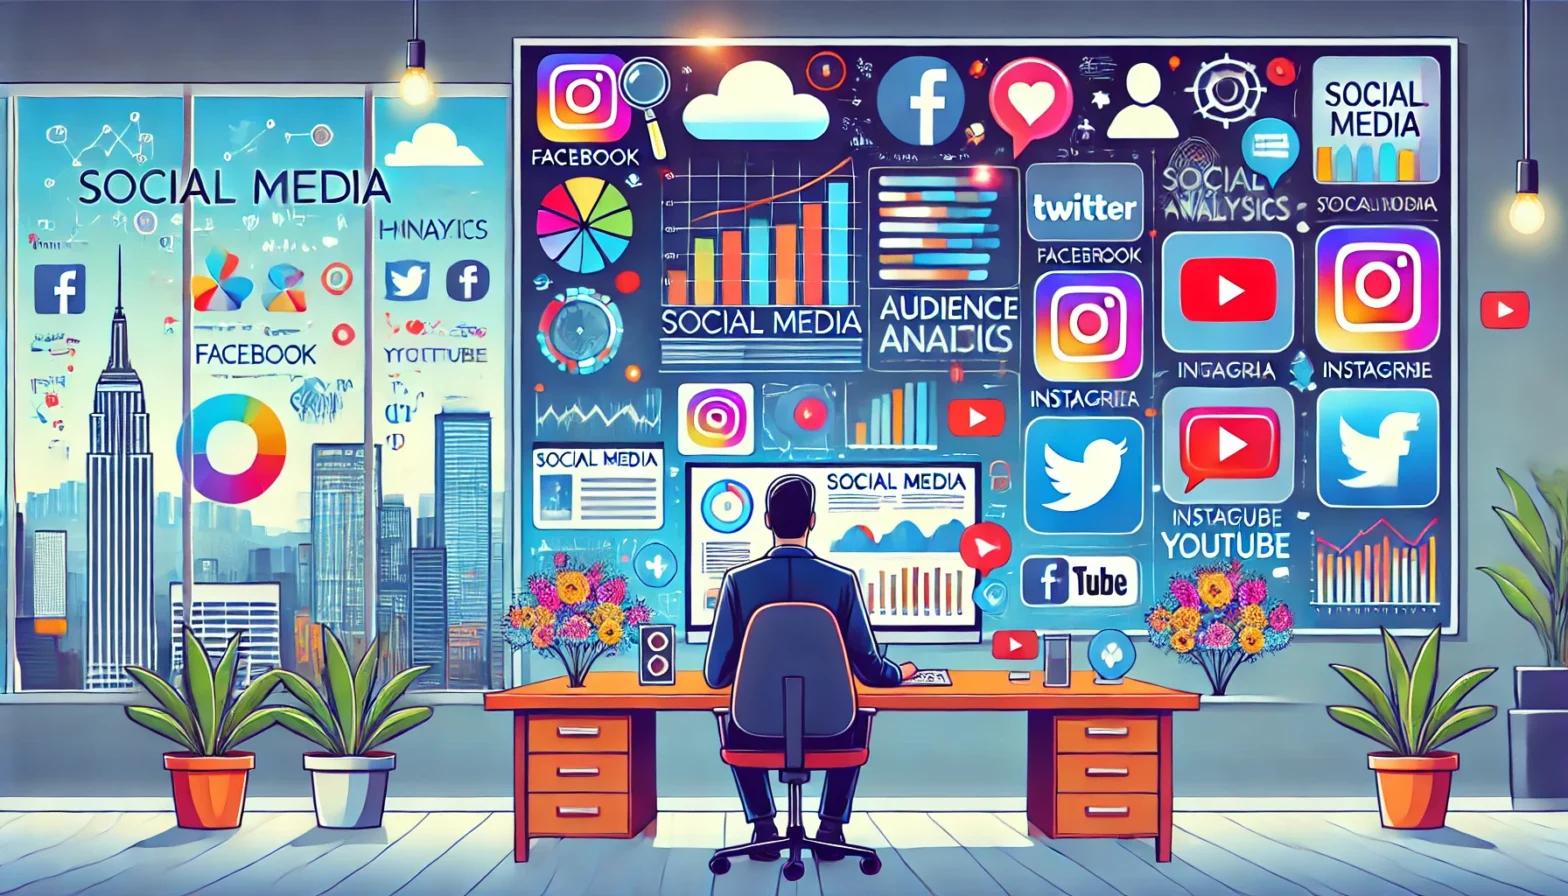 "Social media manager analyzing audience insights on multiple screens displaying graphs, charts, and word clouds, surrounded by icons of popular social media platforms in a modern office with a cityscape view."